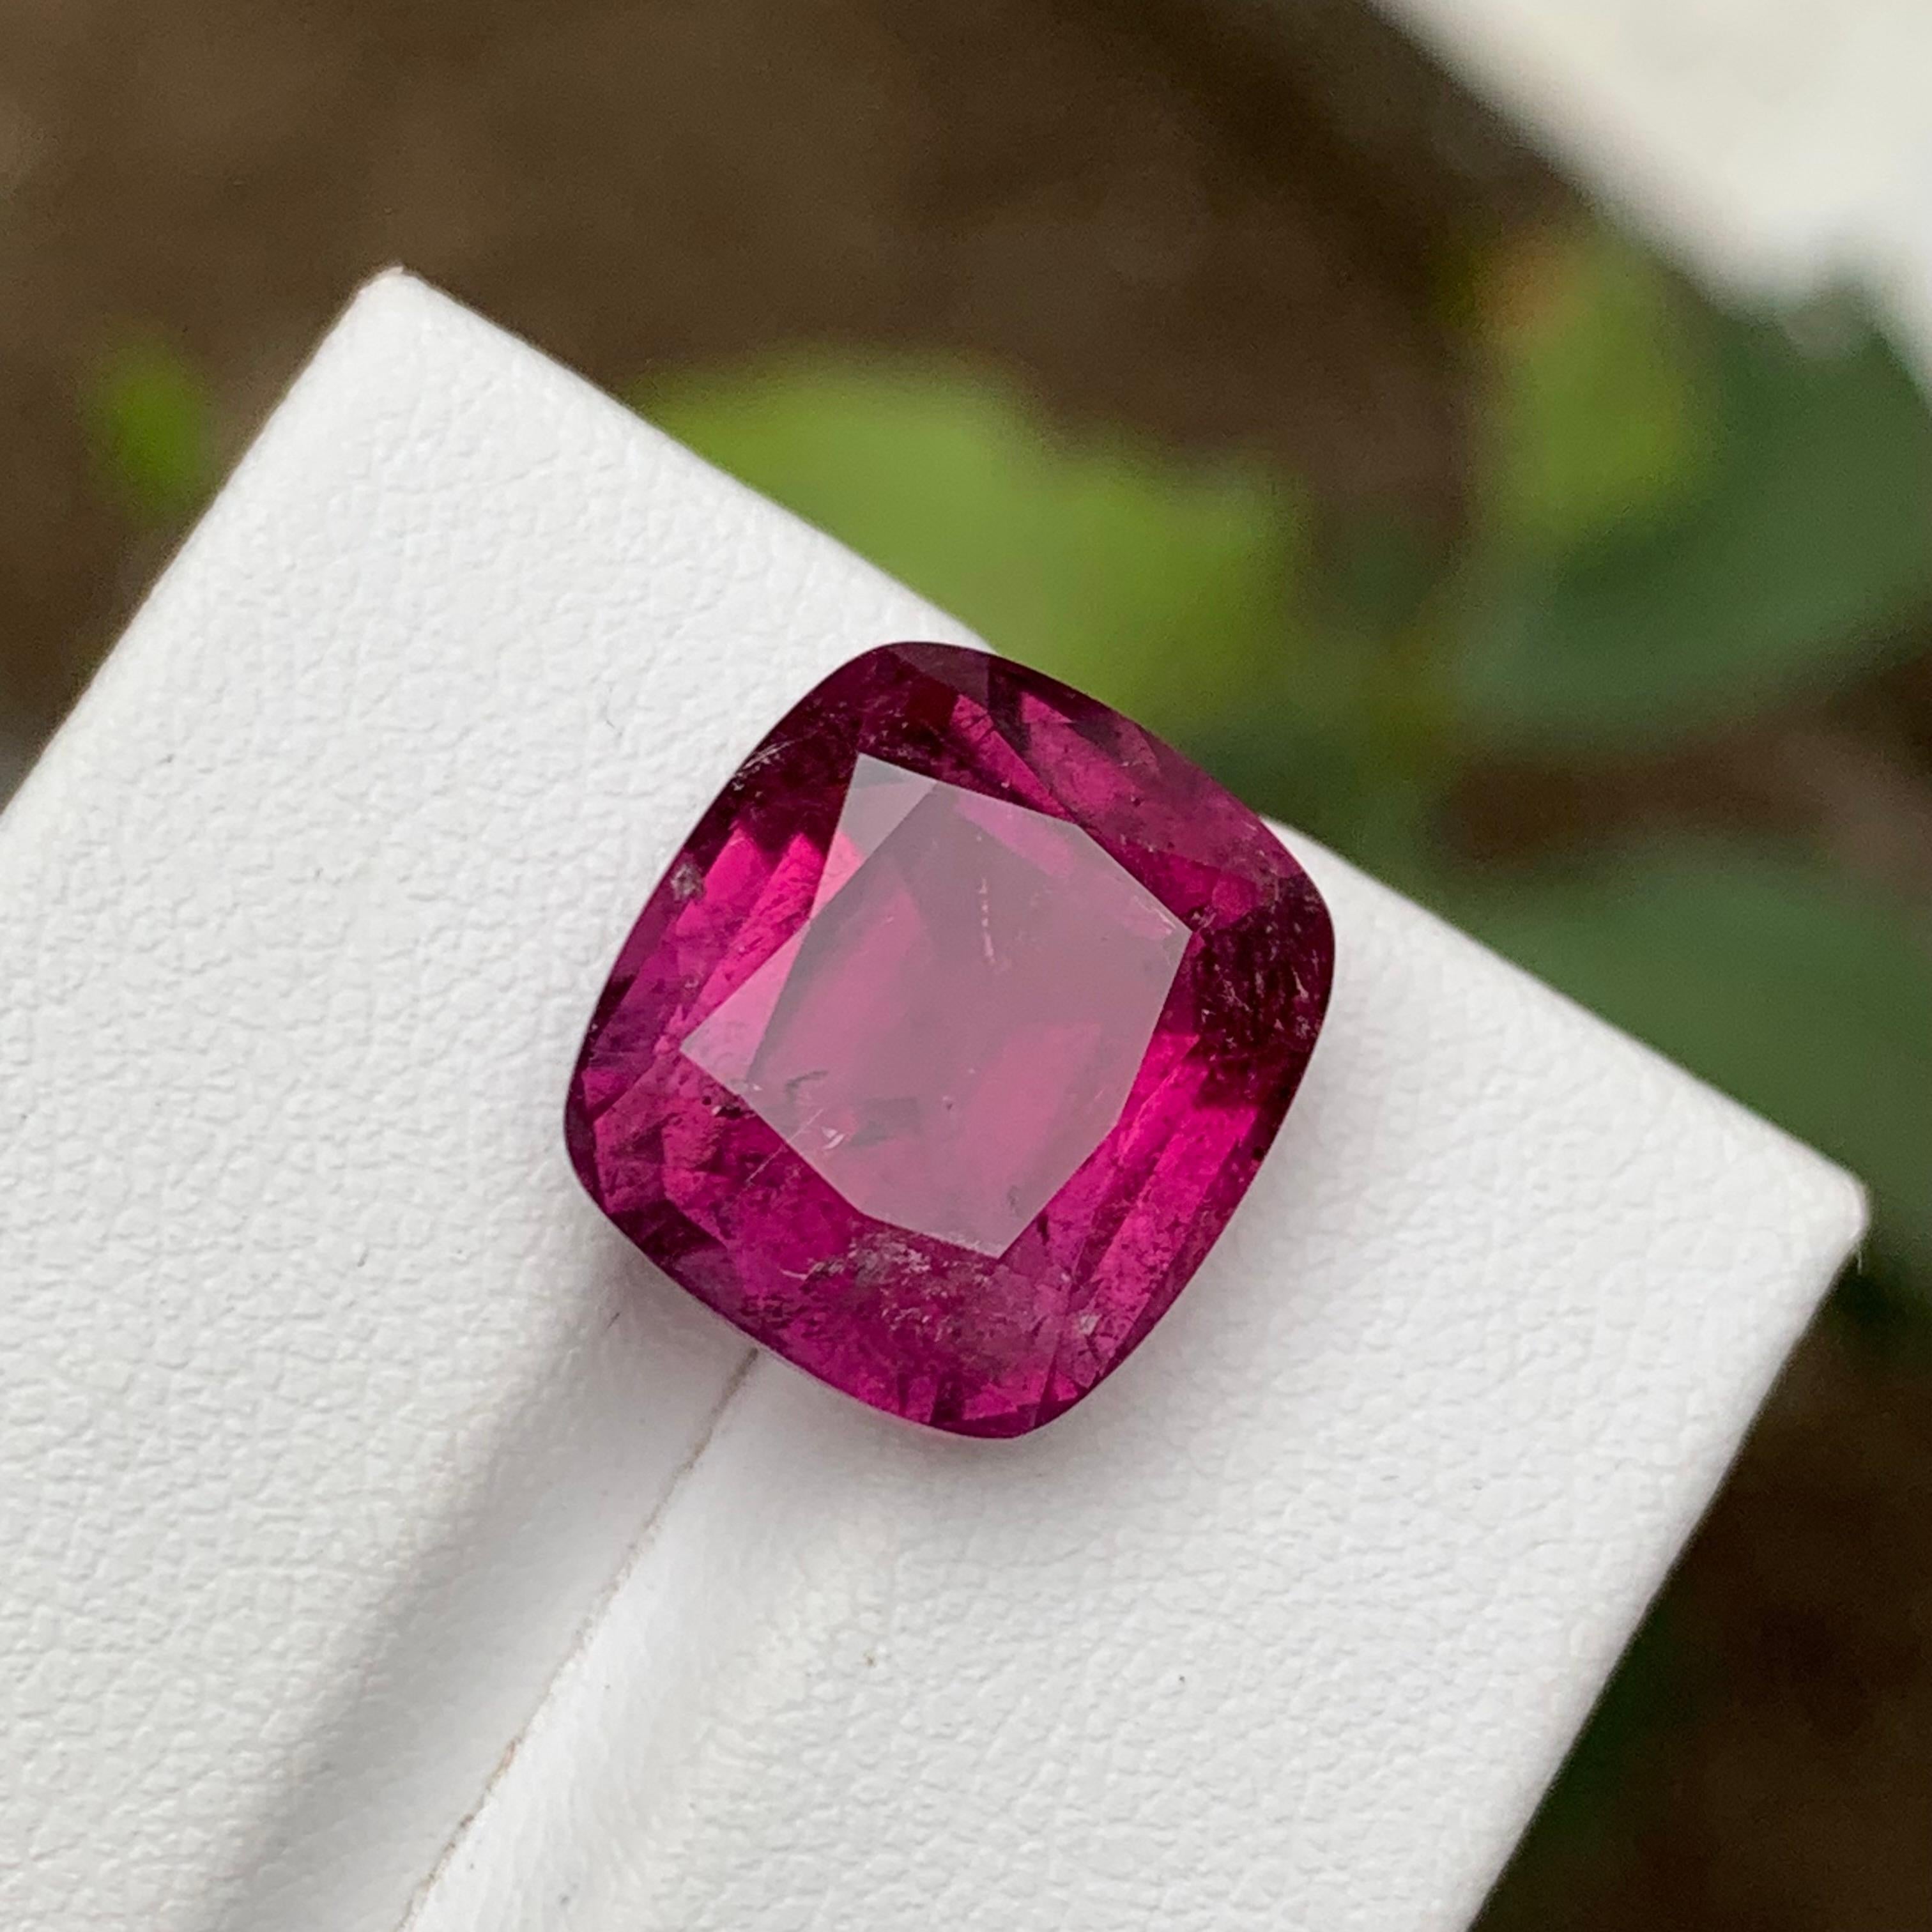 GEMSTONE TYPE: Rubellite Tourmaline
PIECE(S): 1
WEIGHT: 11.05 Carats
SHAPE: Cushion 
SIZE (MM): 14.17 x 12.80 x 8.32
COLOR: Purplish Pink
CLARITY: Moderately Included 
TREATMENT: Heated
ORIGIN: Afghanistan
CERTIFICATE: On demand

Introducing our